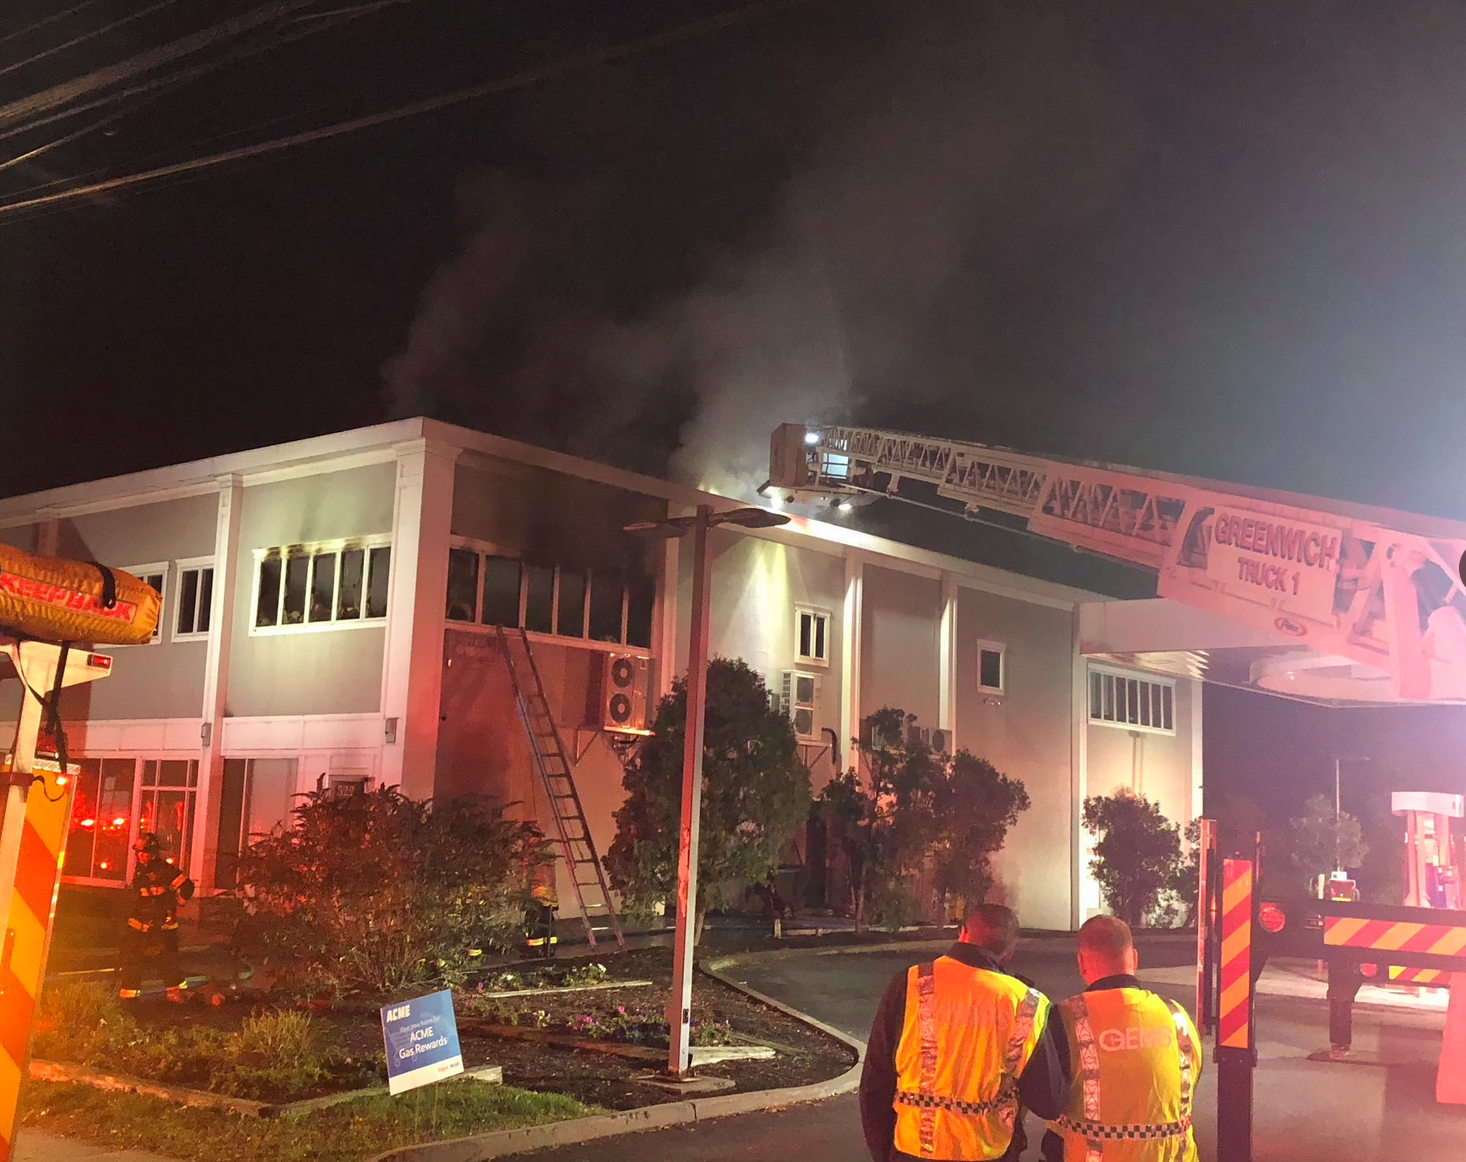 Fire at 522 East Putnam Avenue in Cos Cob. Photo: Greenwich Professional Firefighters Local 1042 Twitter